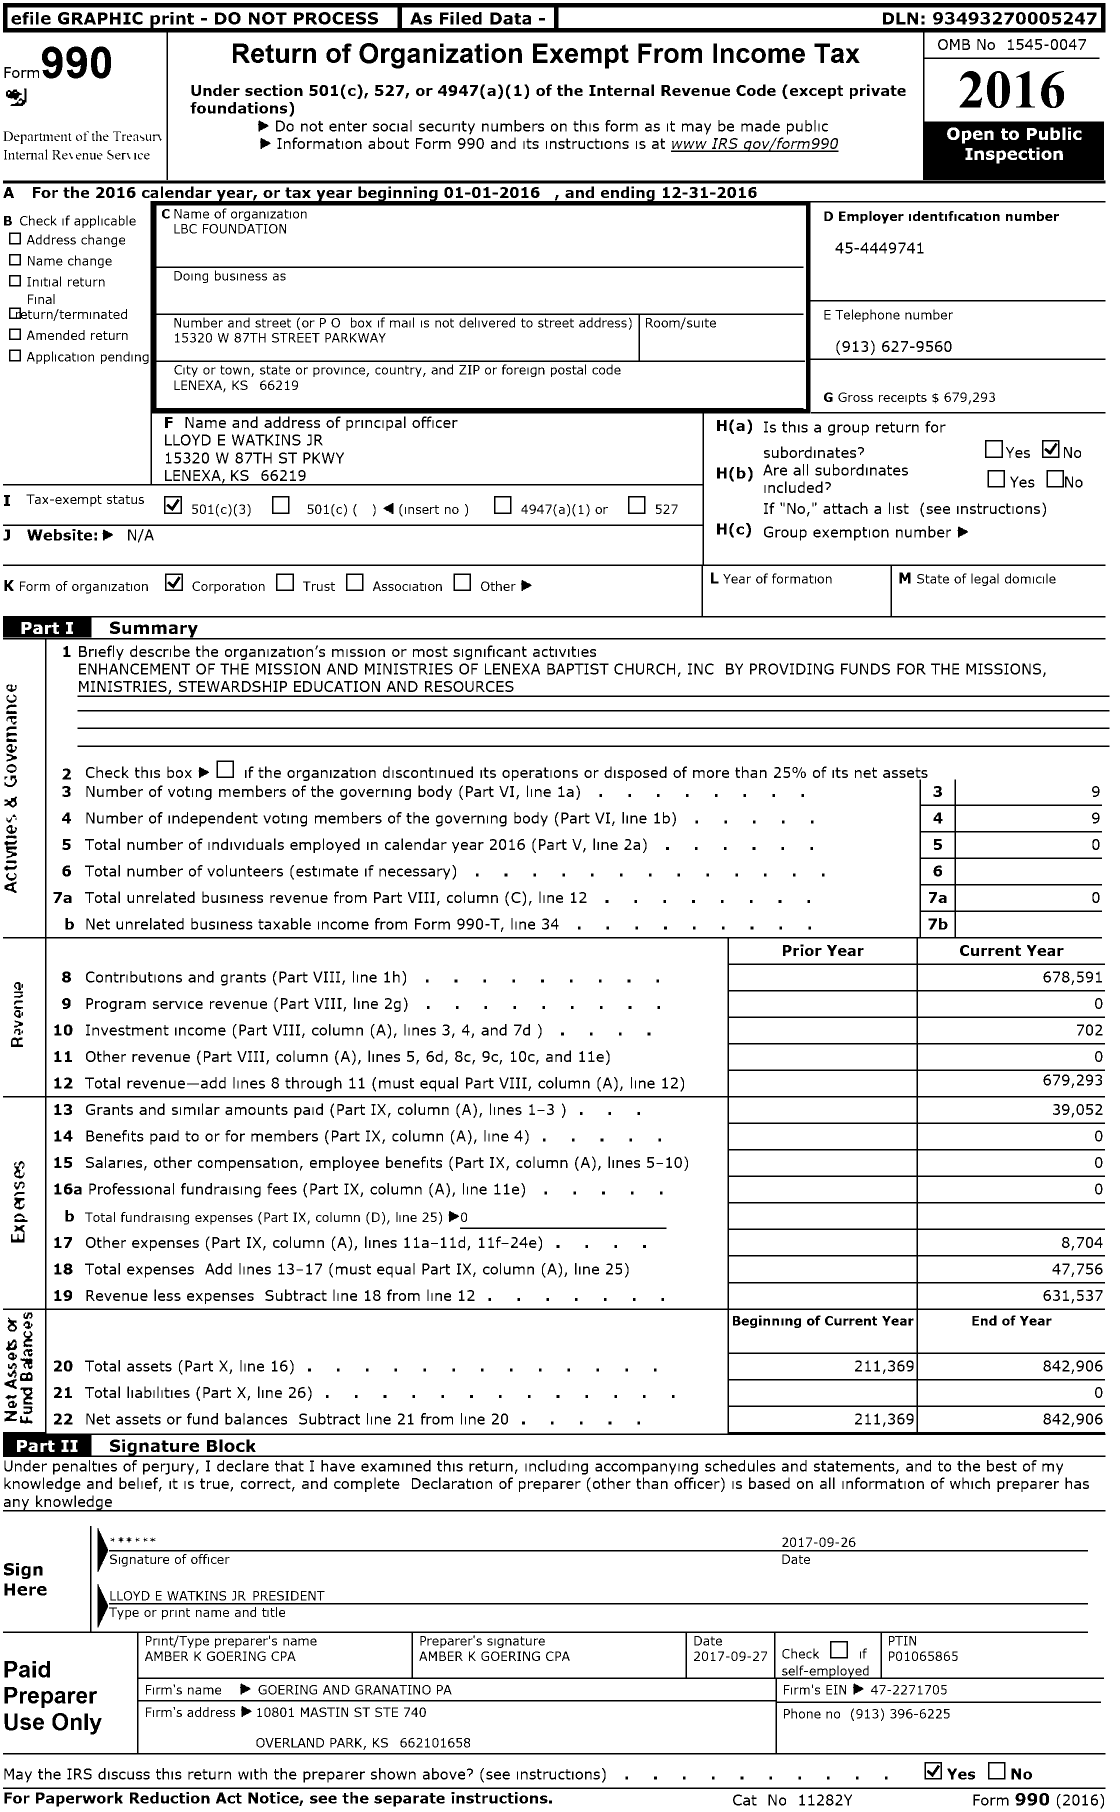 Image of first page of 2016 Form 990 for LBC Foundation